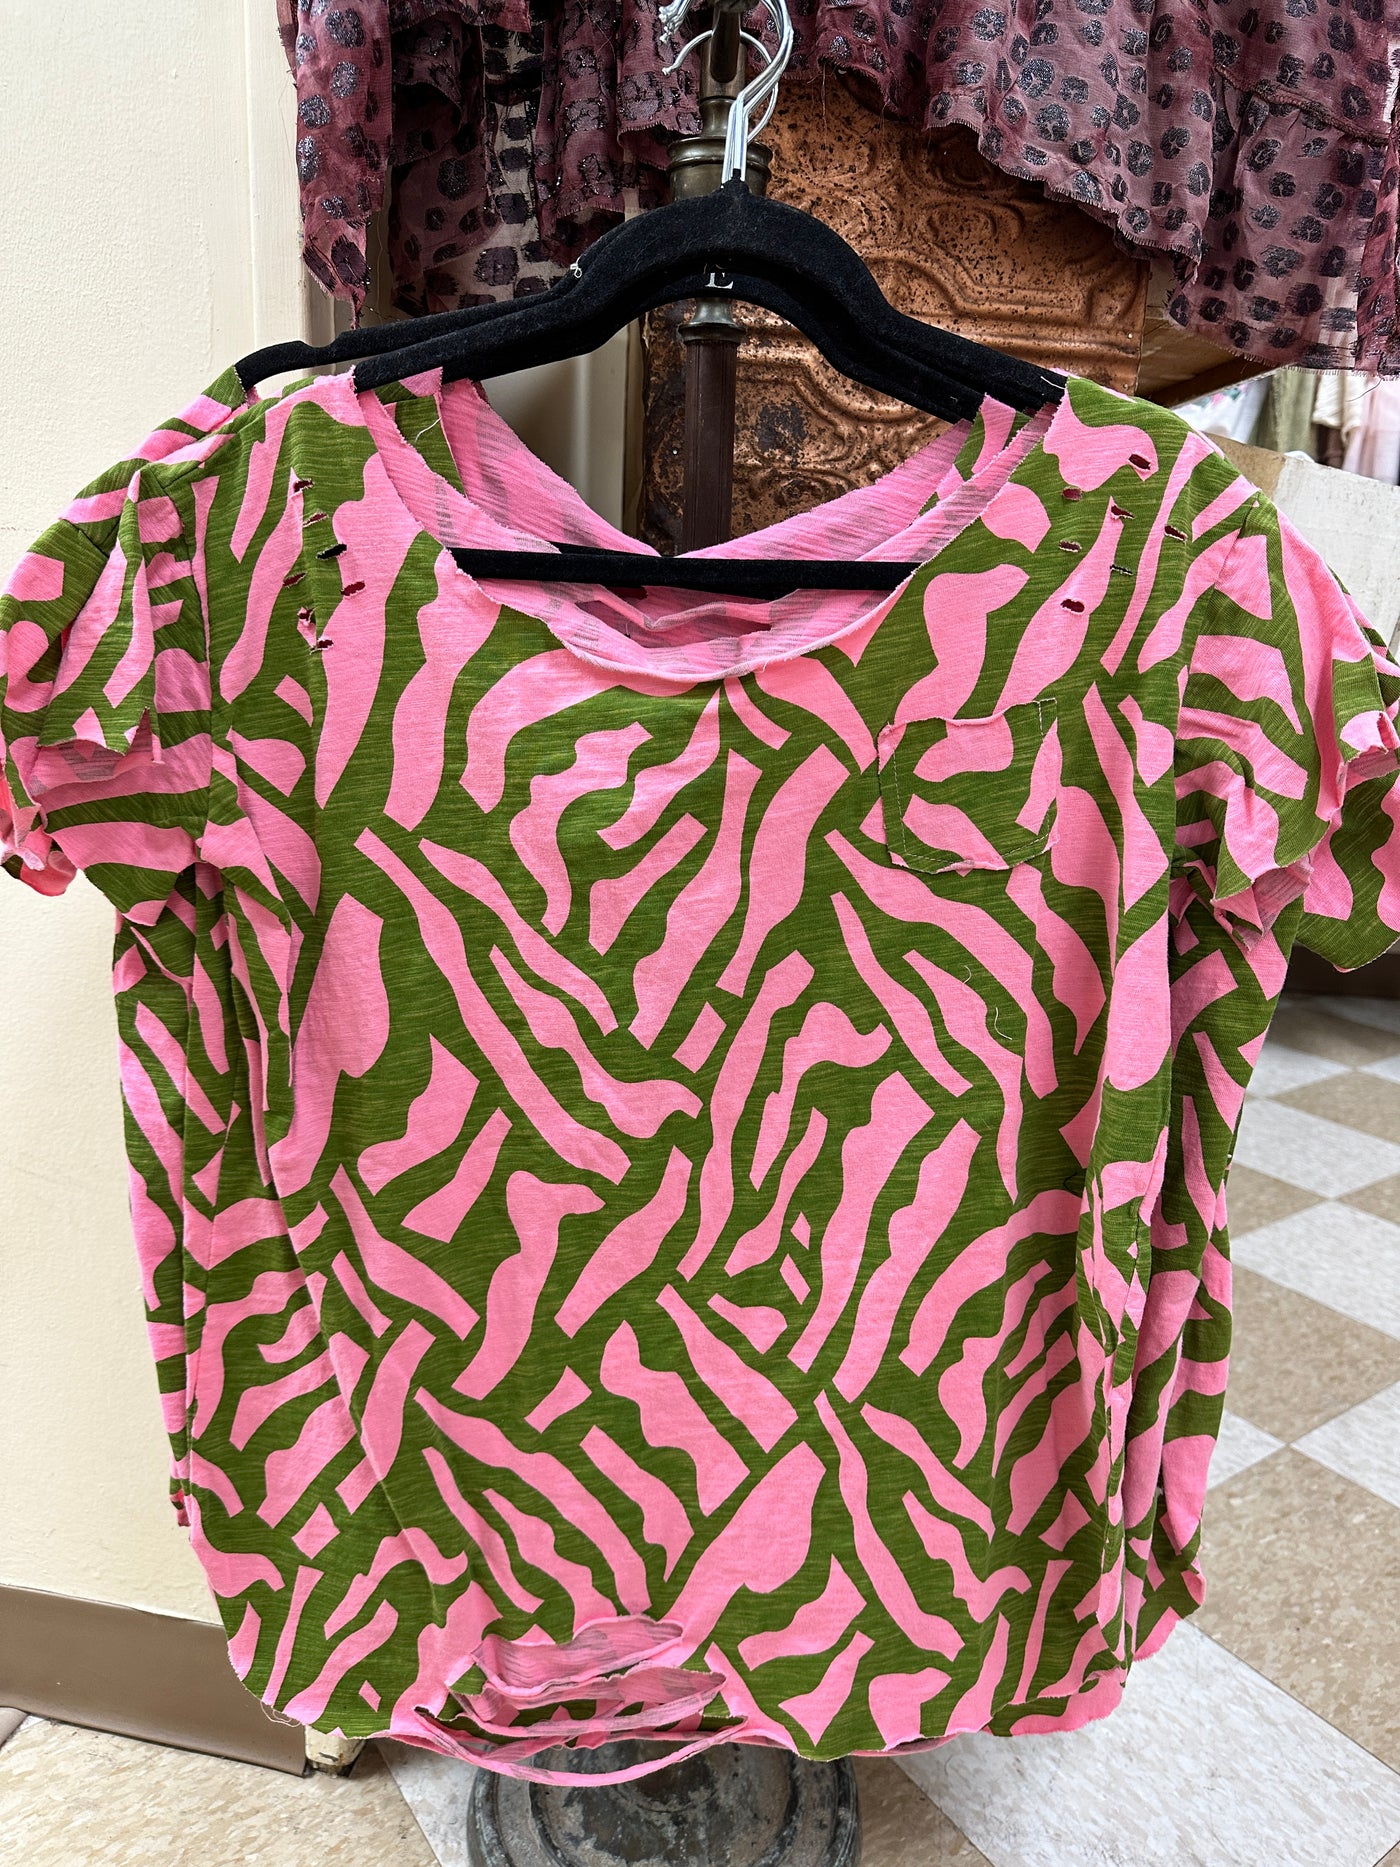 A Rare Bird Pink and Olive Animal Rip Tee